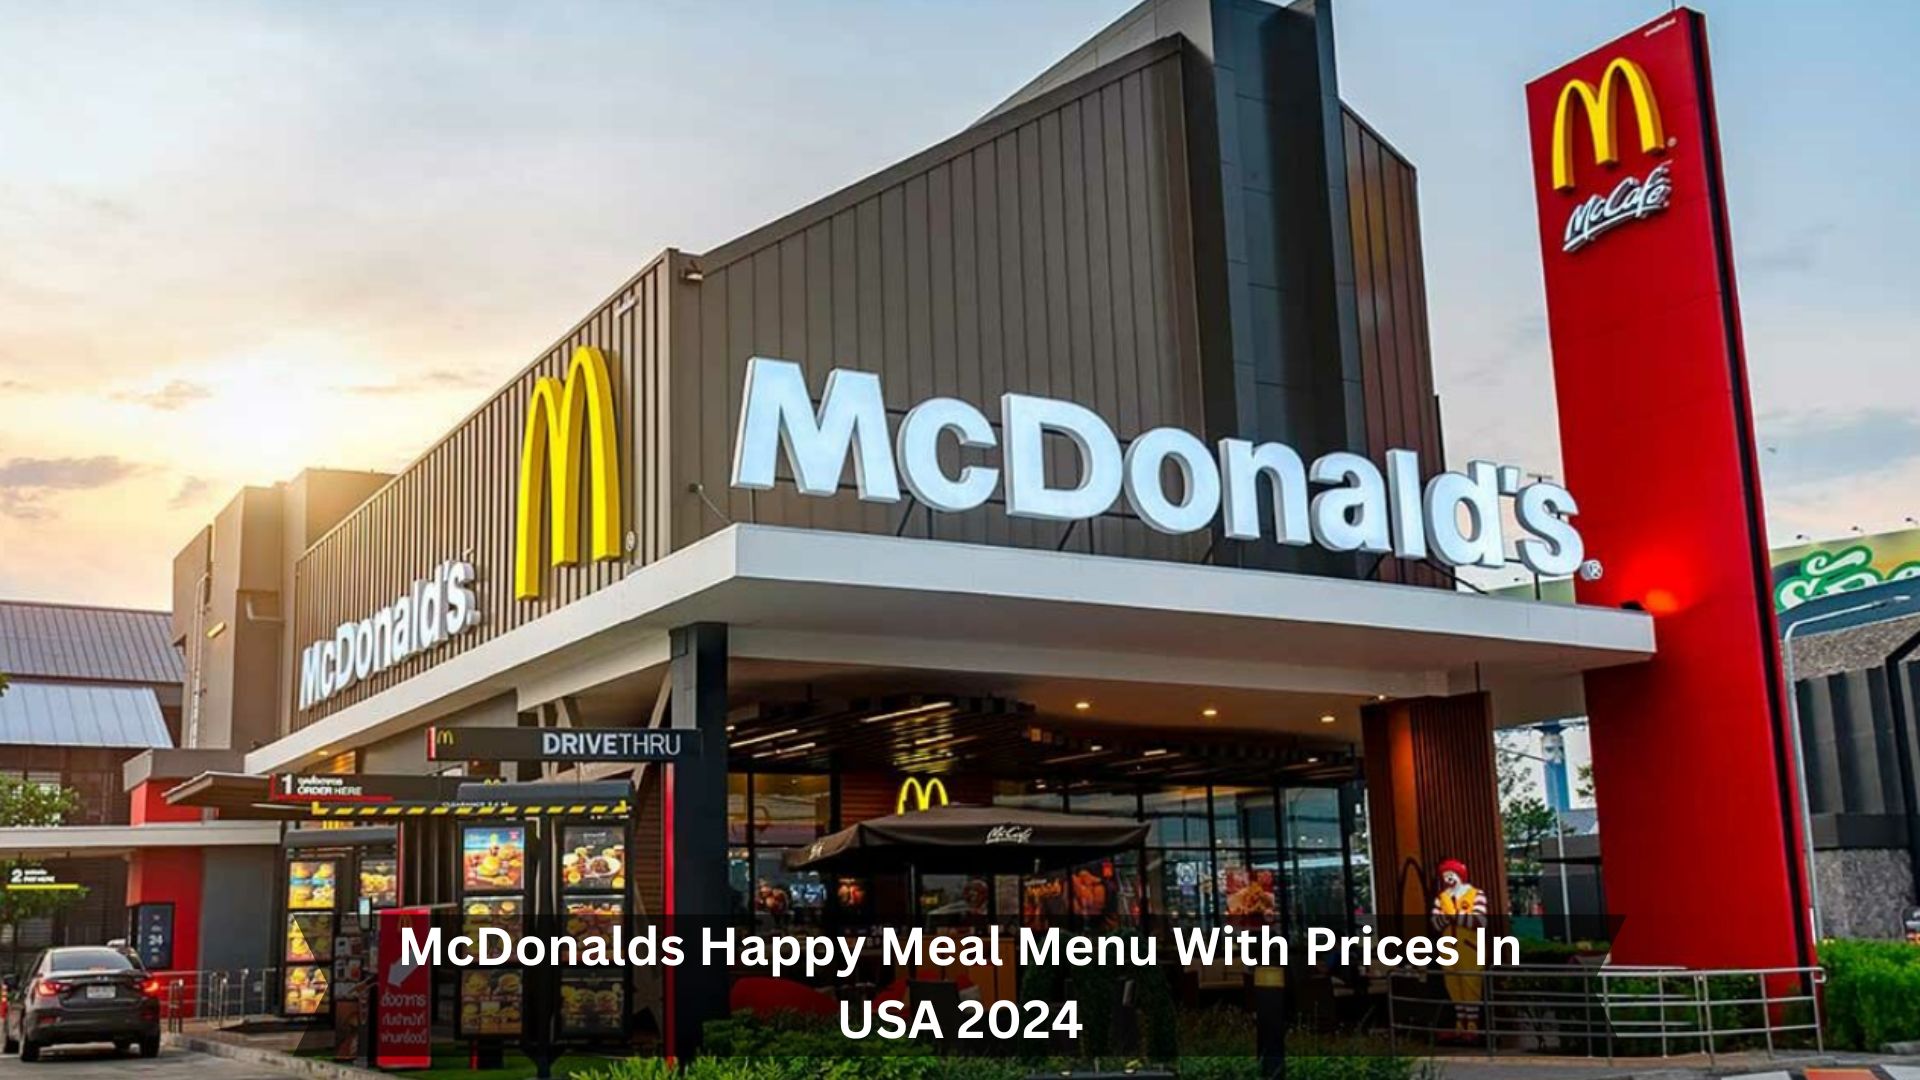 McDonalds-Happy-Meal-Menu-With-Prices-In-USA-2024